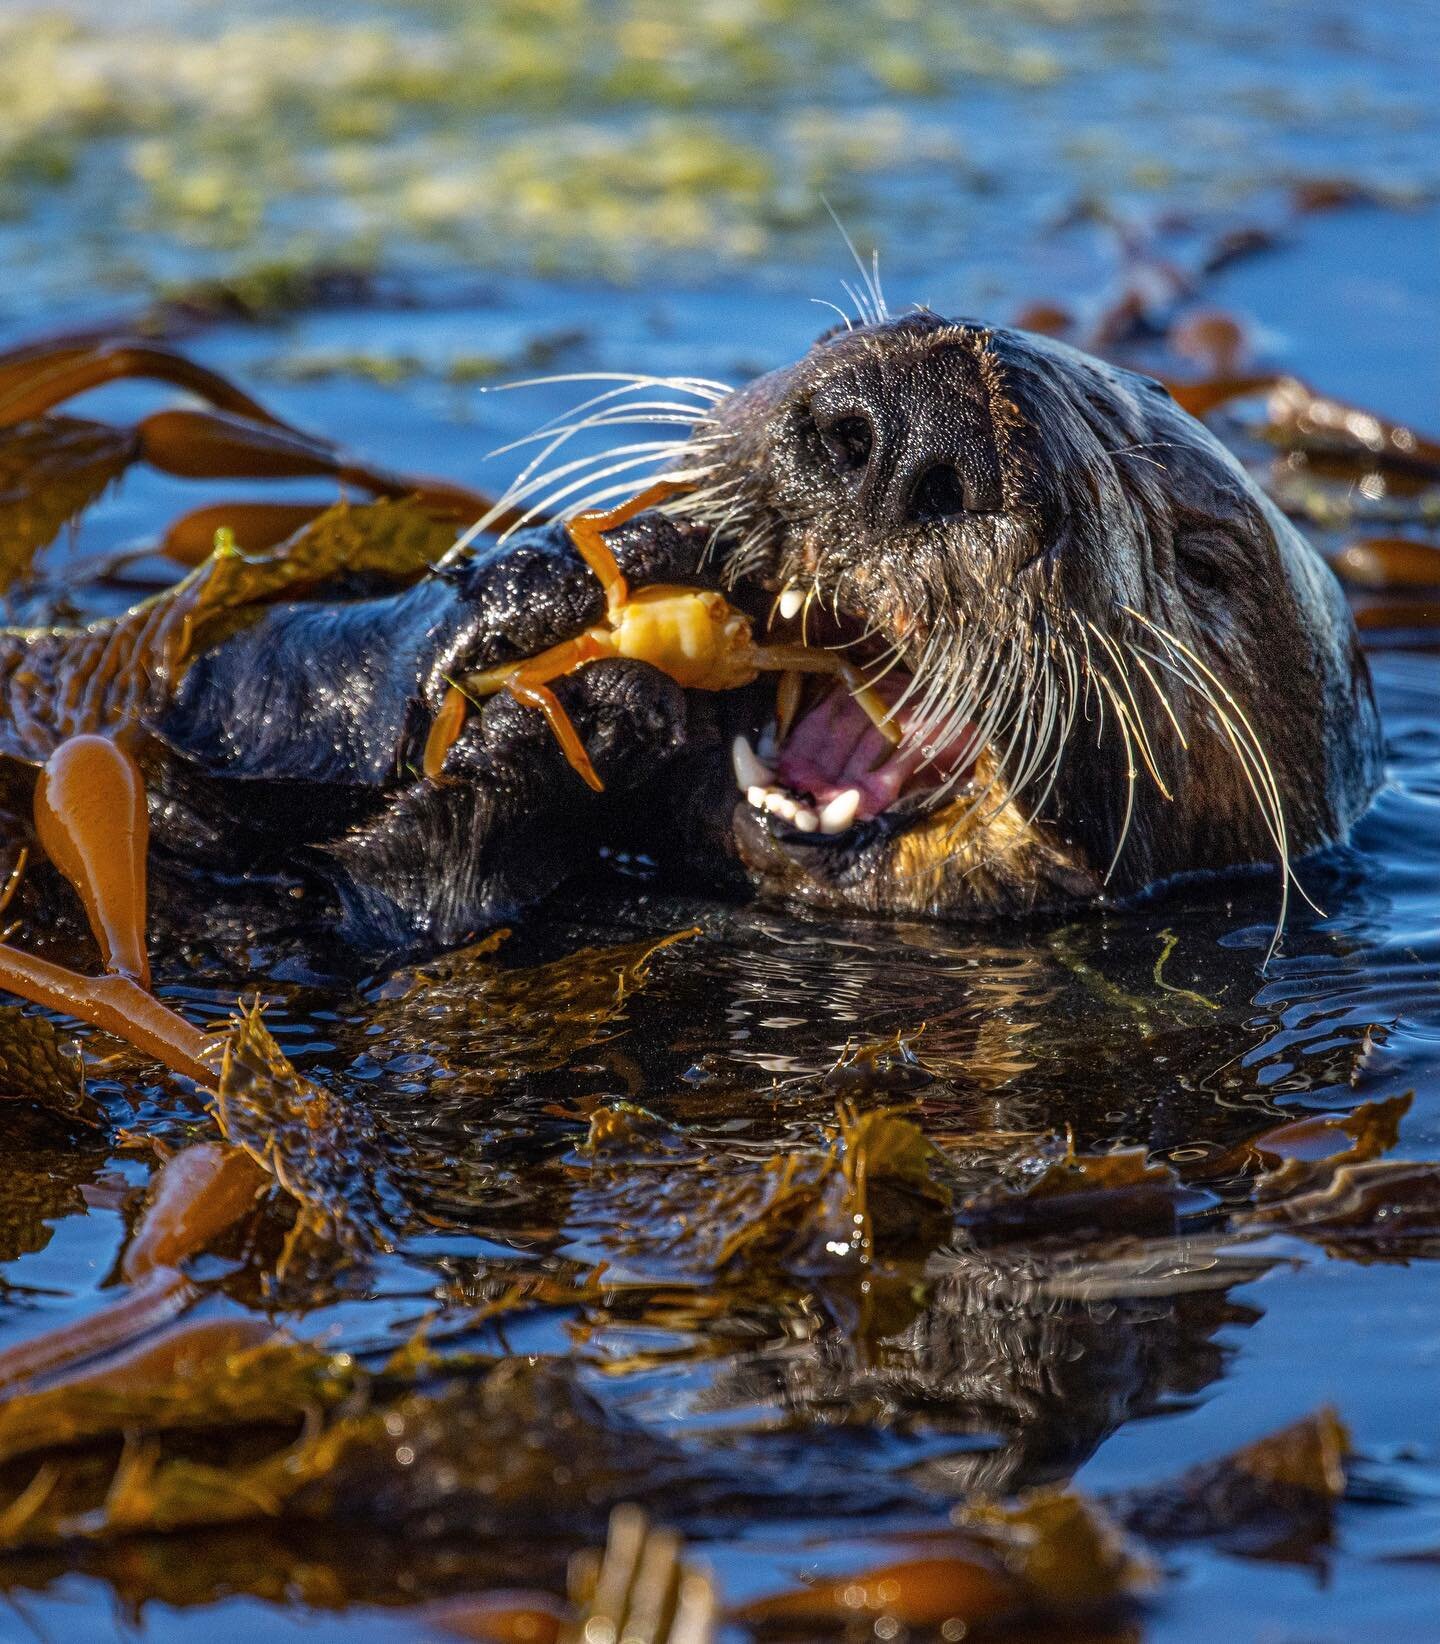 A southern sea otter munching on a crab! This was the first photo I have been able to go out and take in a while. I love photography so much, and it has been bumming me out that I haven&rsquo;t been out shooting as much as I would like to recently. I